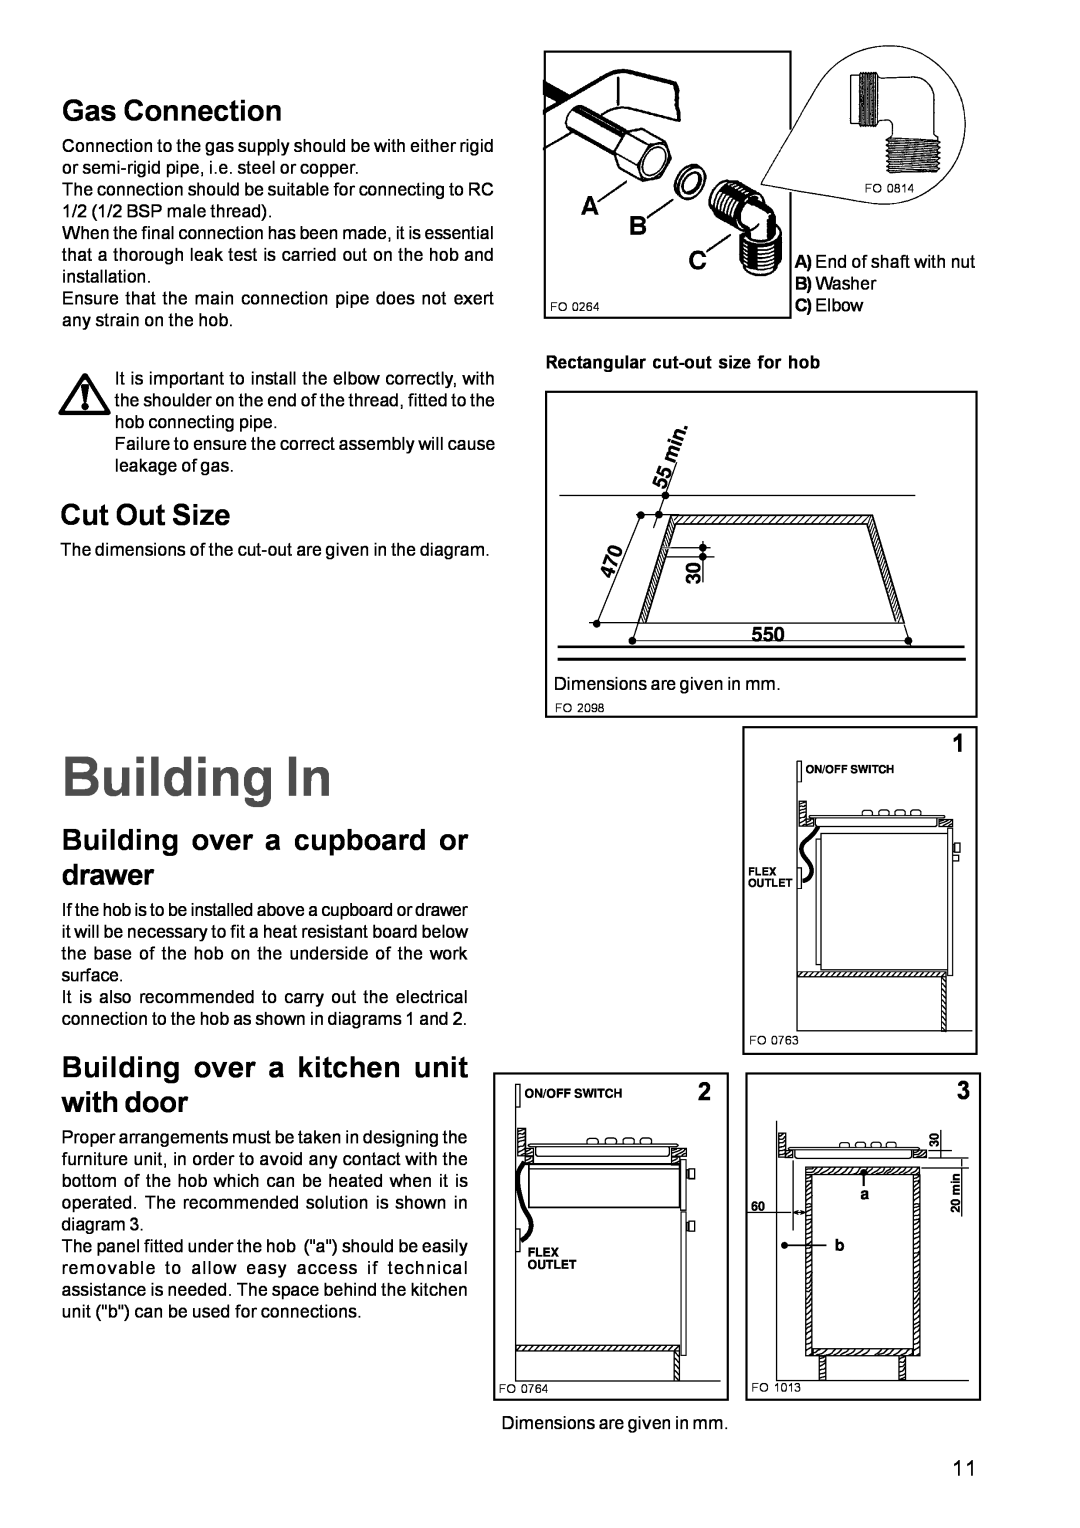 Electrolux EHG 680 manual Building In, Gas Connection, Cut Out Size, Building over a cupboard or drawer, 470 550 